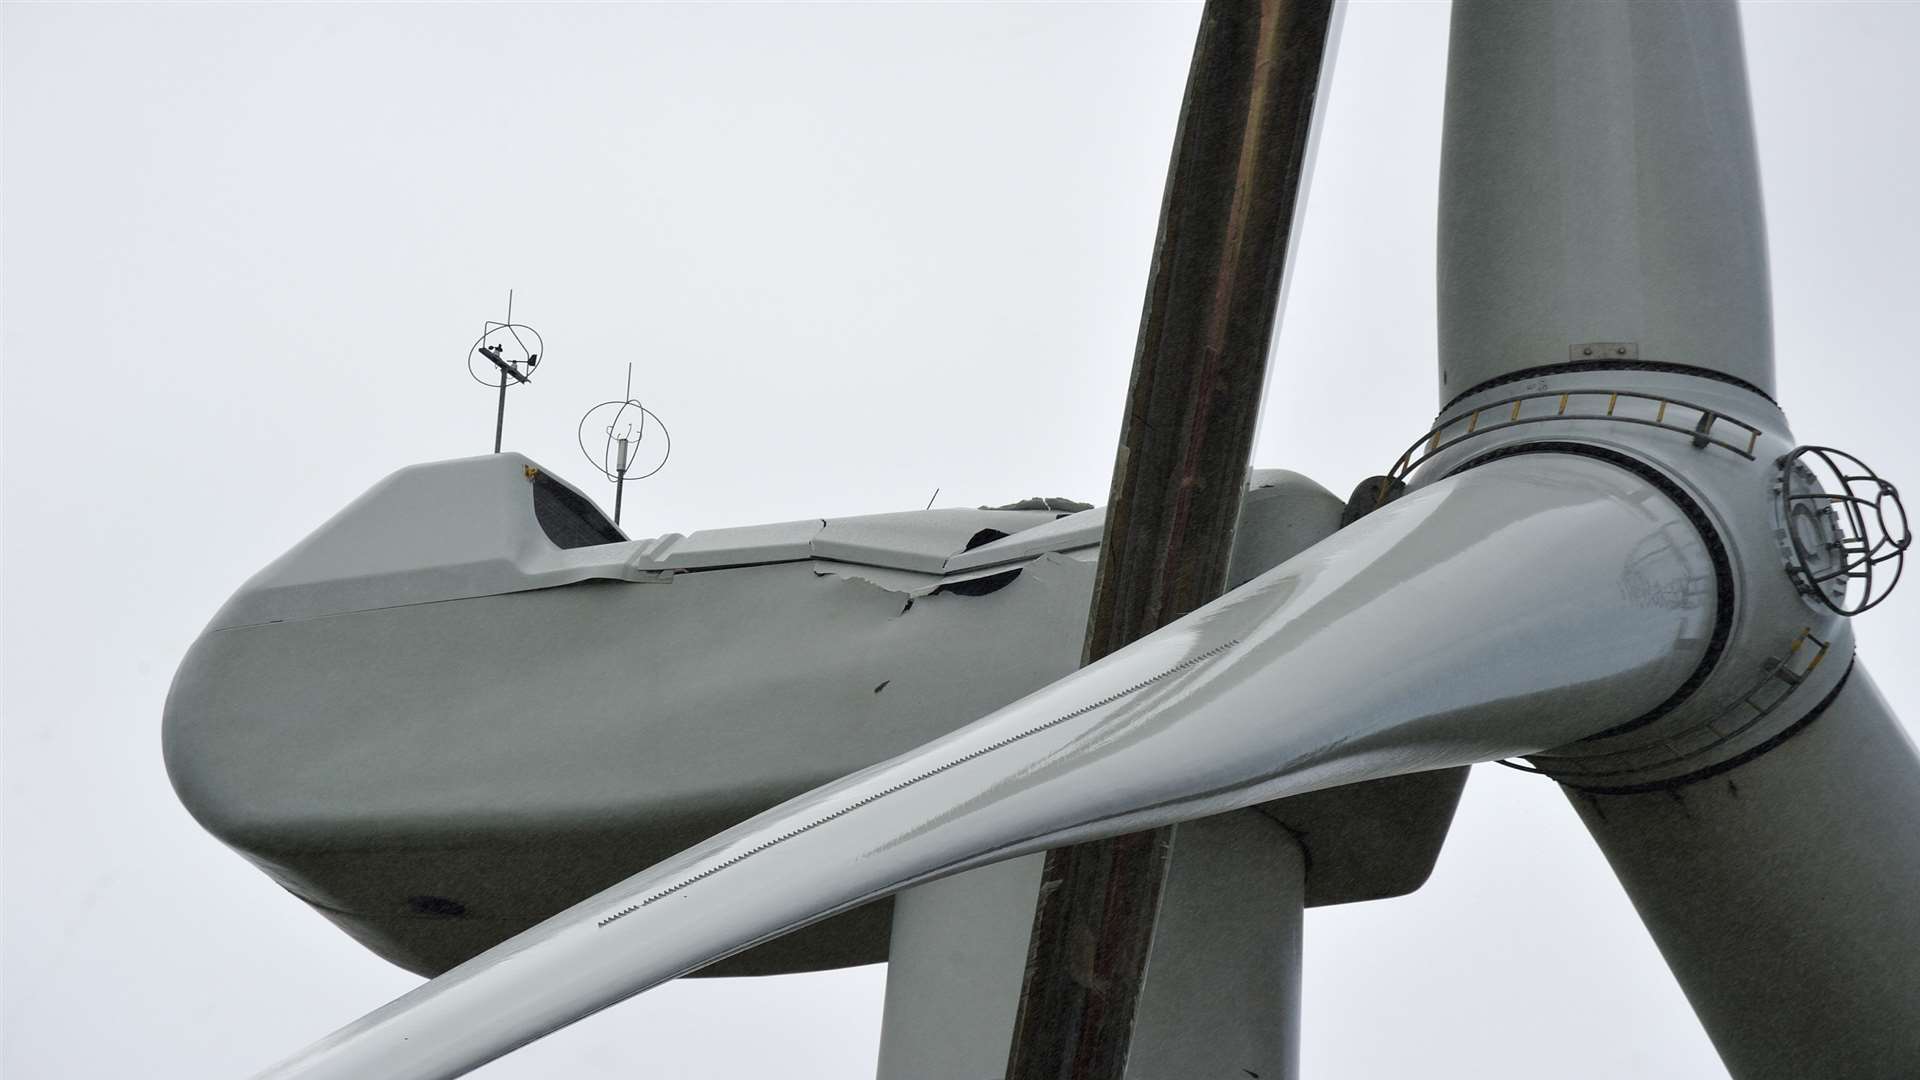 A dent can be seen in the turbine following the strike